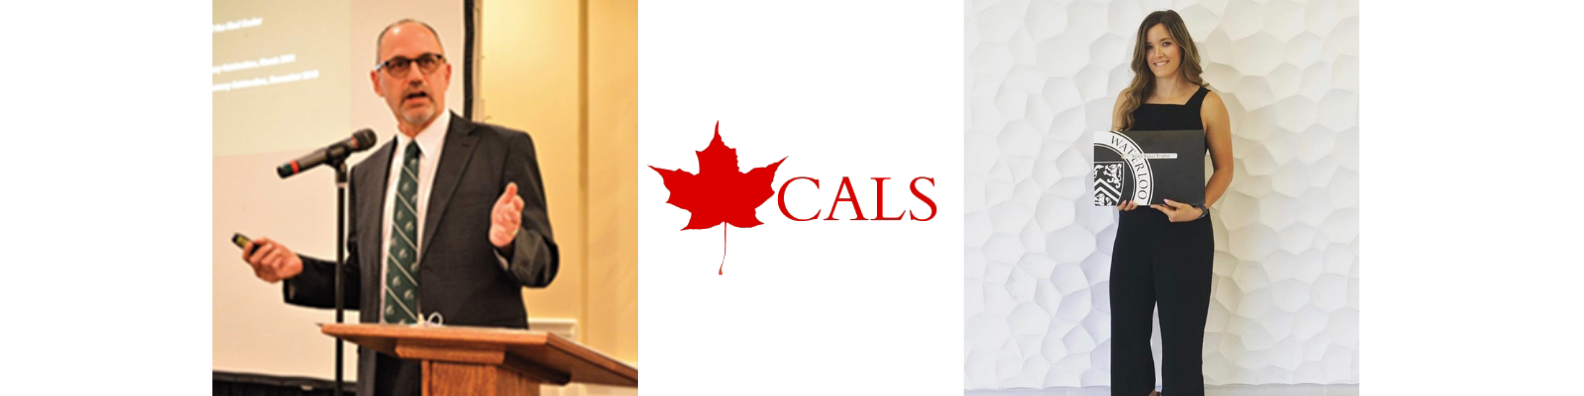 CALS red maple leaf logo above a photo of Mark Havitz presenting at a podium and a photo of Jaylyn Leighton holding her degree